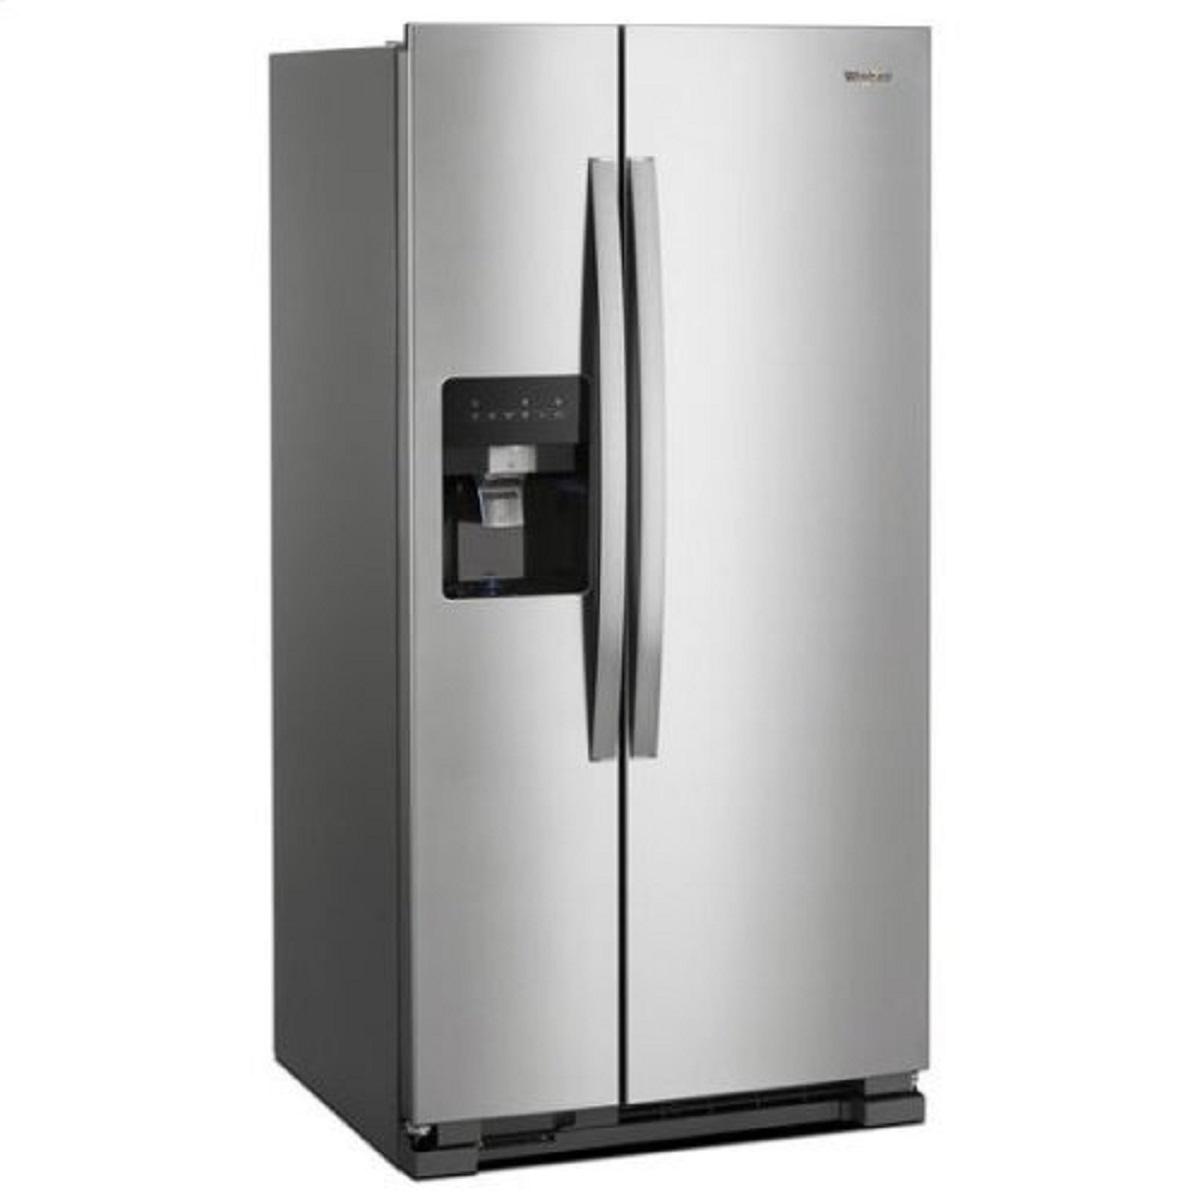 Whirlpool WRS315SDHM 24 Cu. Ft. 36" Side-by-Side Refrigerator in Stainless Steel